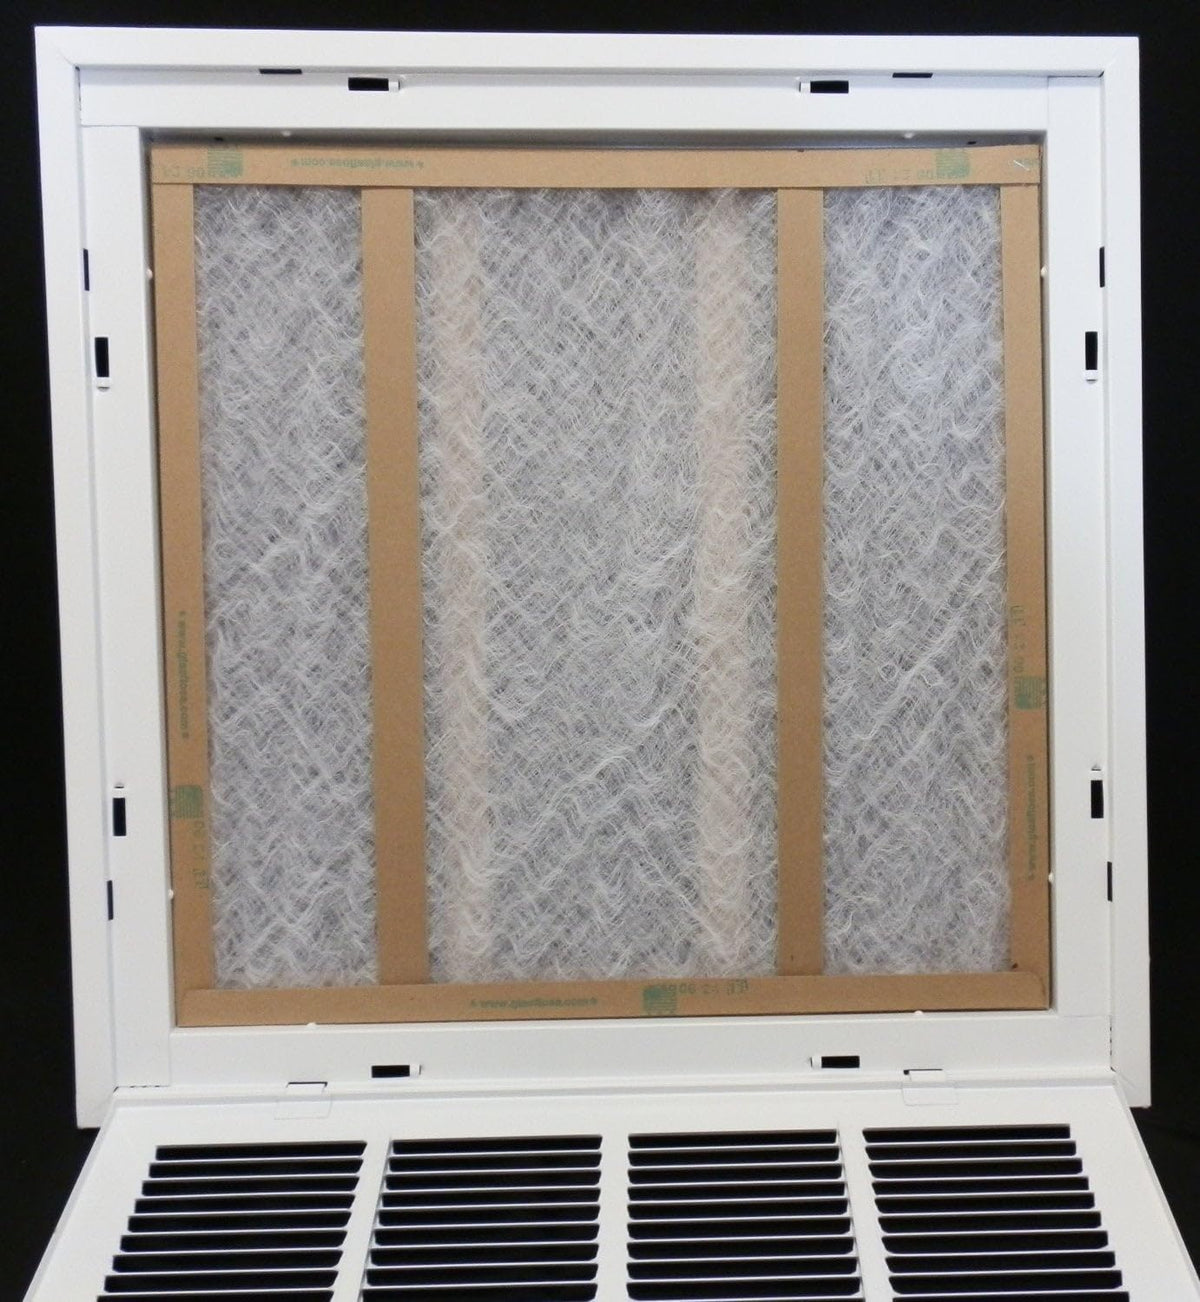 10&quot; X 10&quot; Steel Return Air Filter Grille for 1&quot; Filter - Fixed Hinged - [Outer Dimensions: 12 5/8&quot; X 12 5/8&quot;]